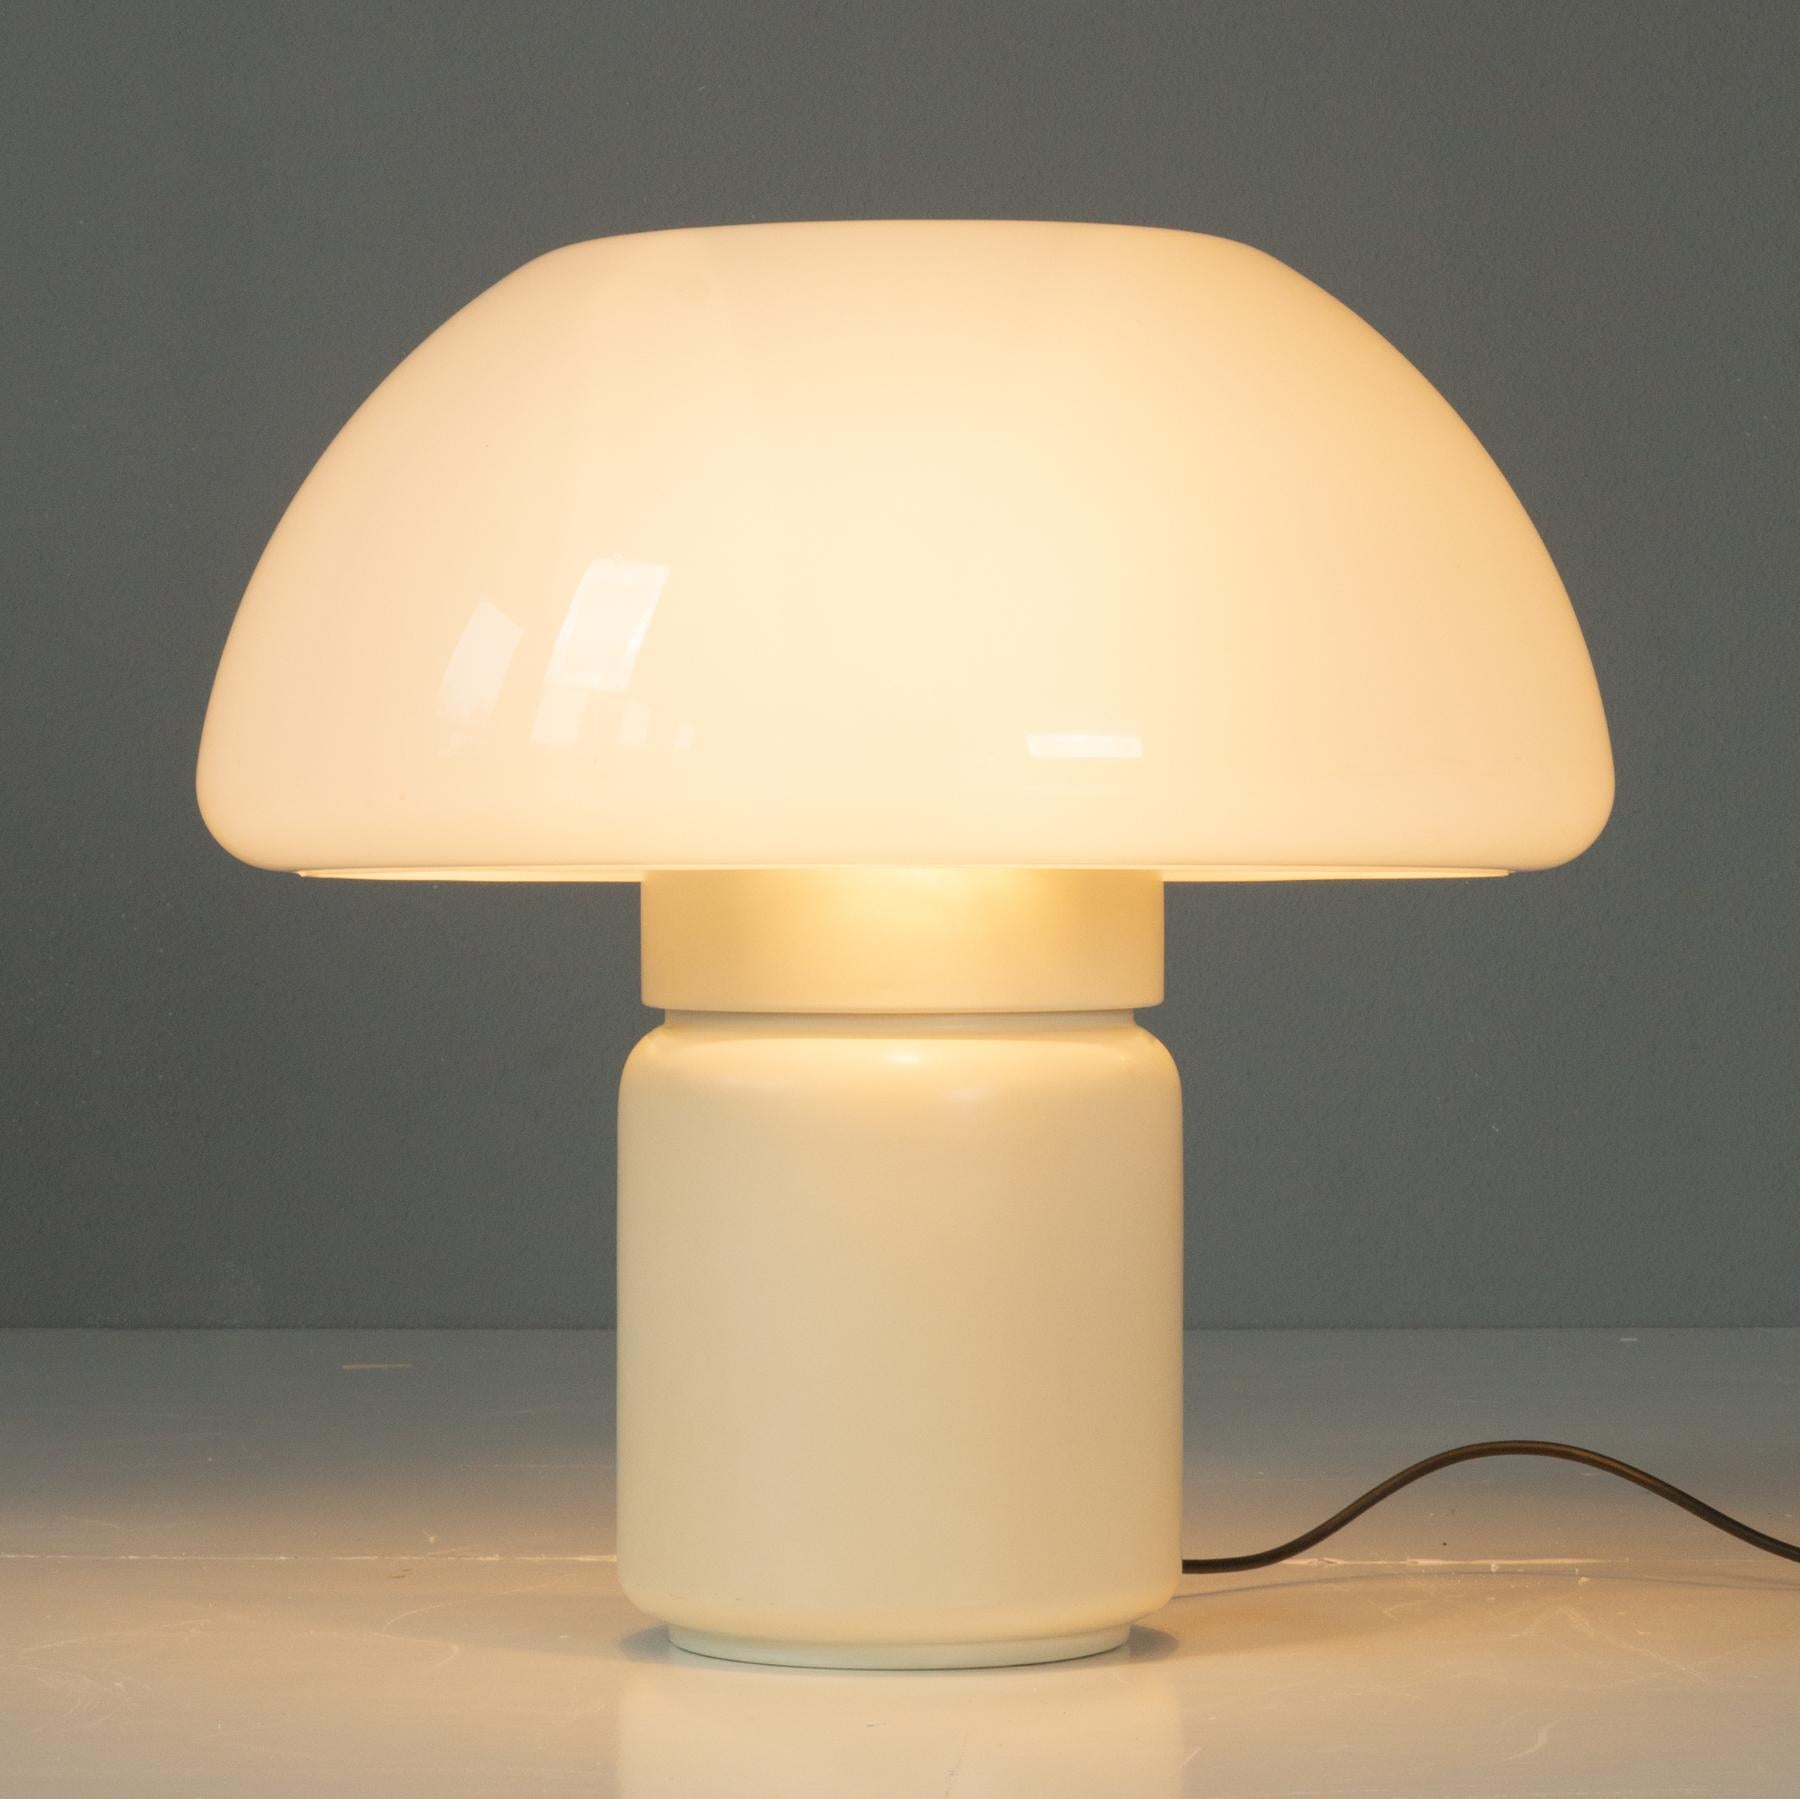 Elio Martinelli for Martinelli Luce Model 625, large space age mushroom lamp.

 Elio Martinelli is one of the famous designers of Martinelli luce. This is the model 625 and is a very large version of a mushroom shaped lamp. The general condition